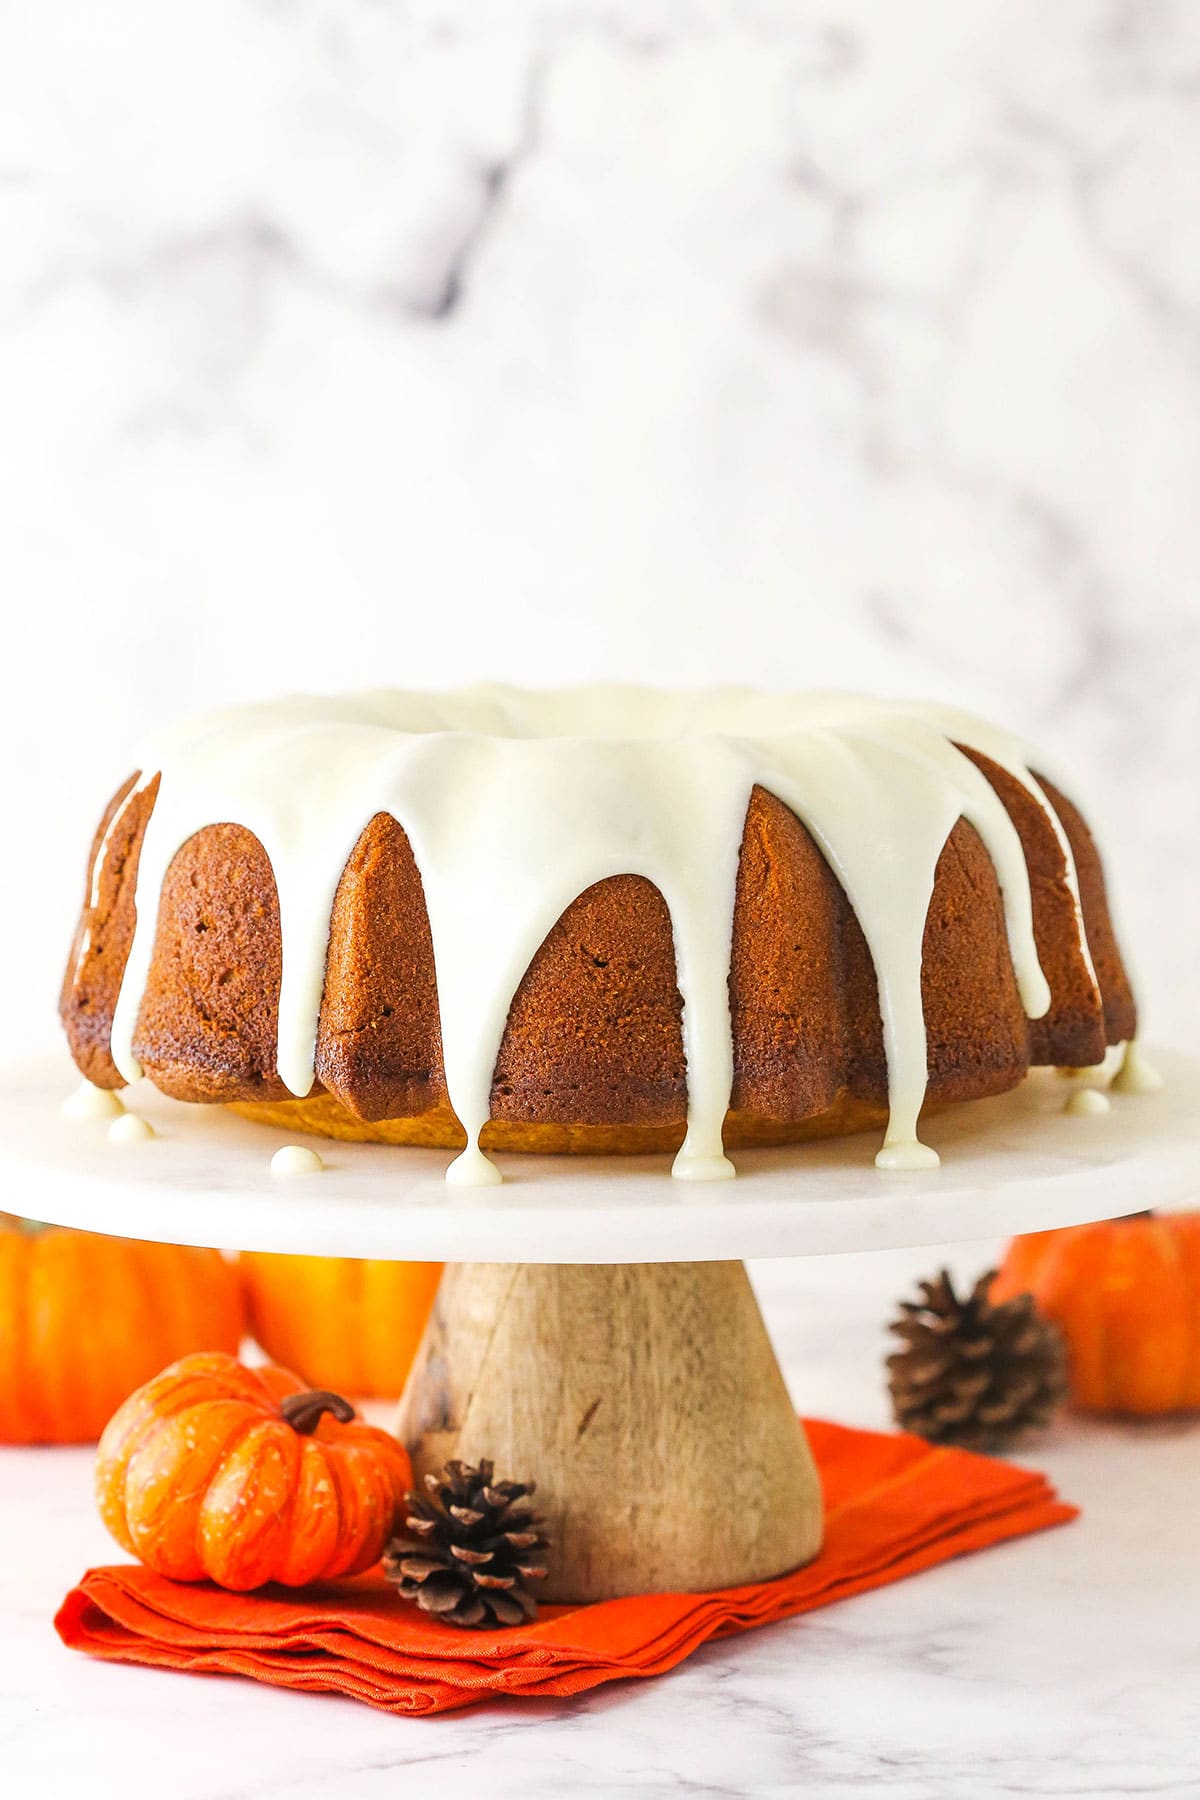 Pumpkin pound cake on marble and wood cake stand with orange cloth underneath.